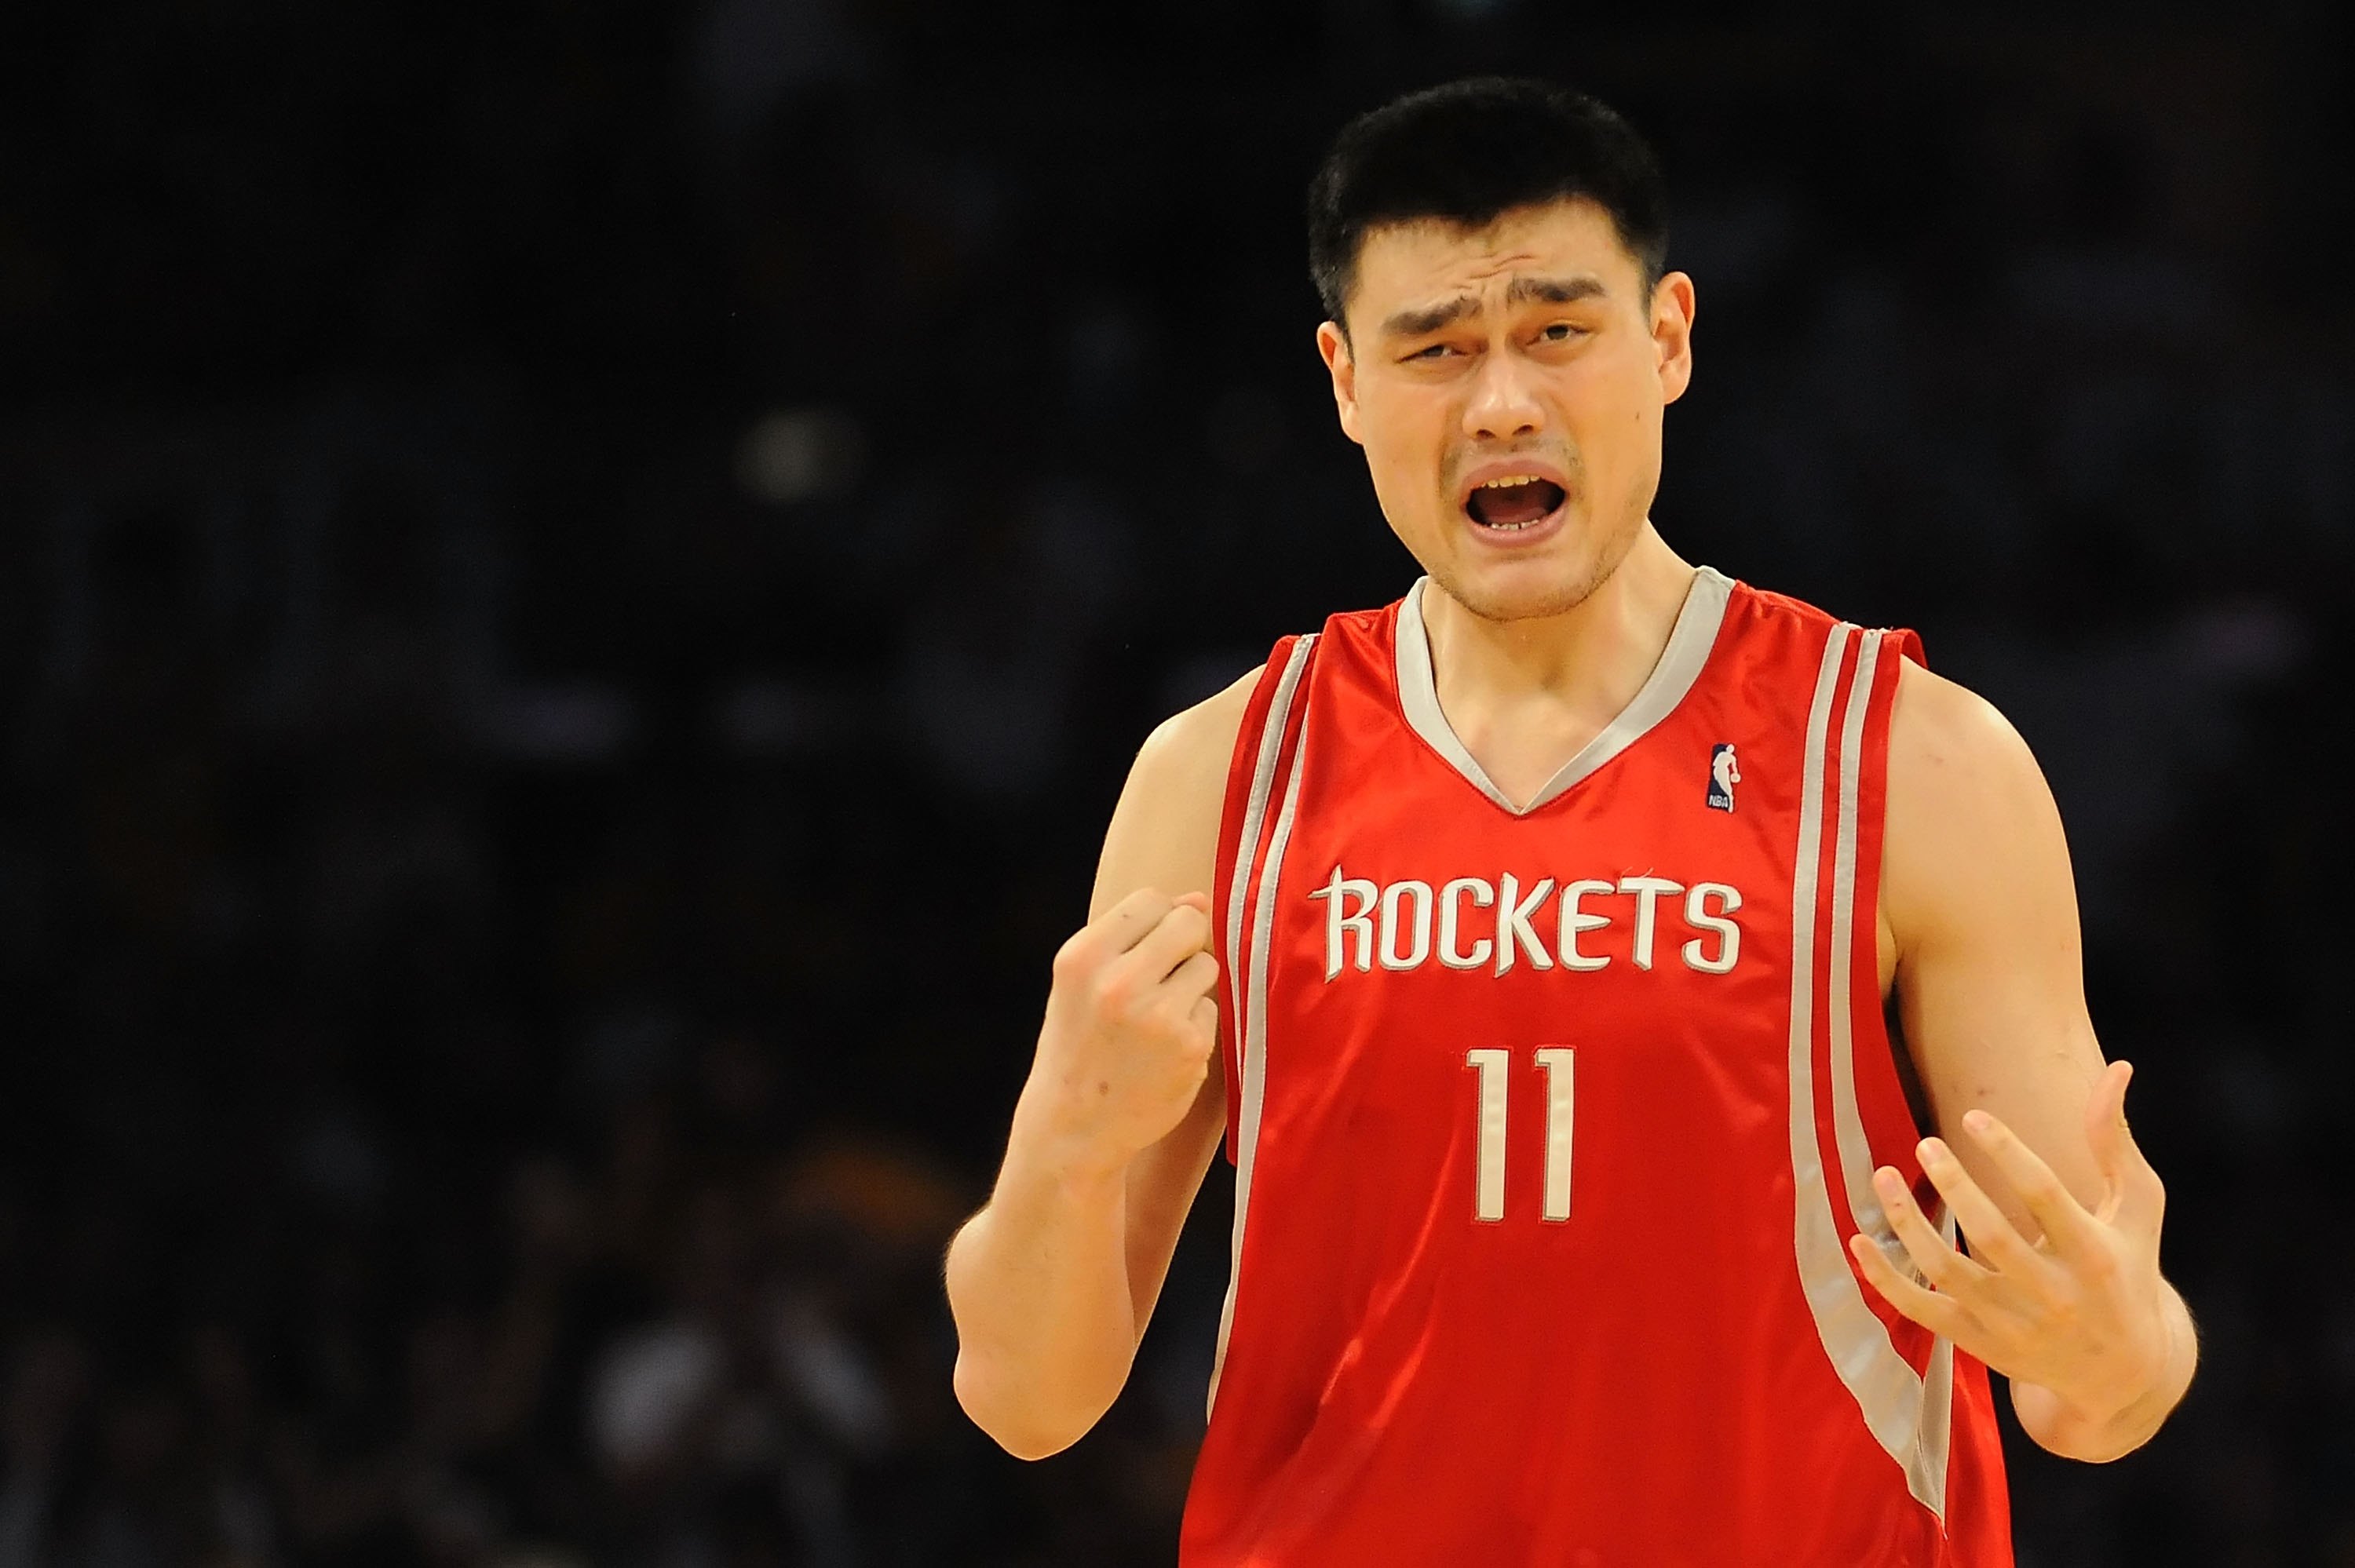 LOS ANGELES, CA - MAY 06:  Yao Ming #11 of the Houston Rockets reacts to a foul called on him in the second quarter against the Los Angeles Lakers in Game Two of the Western Conference Semifinals during the 2009 NBA Playoffs at Staples Center on May 6, 20